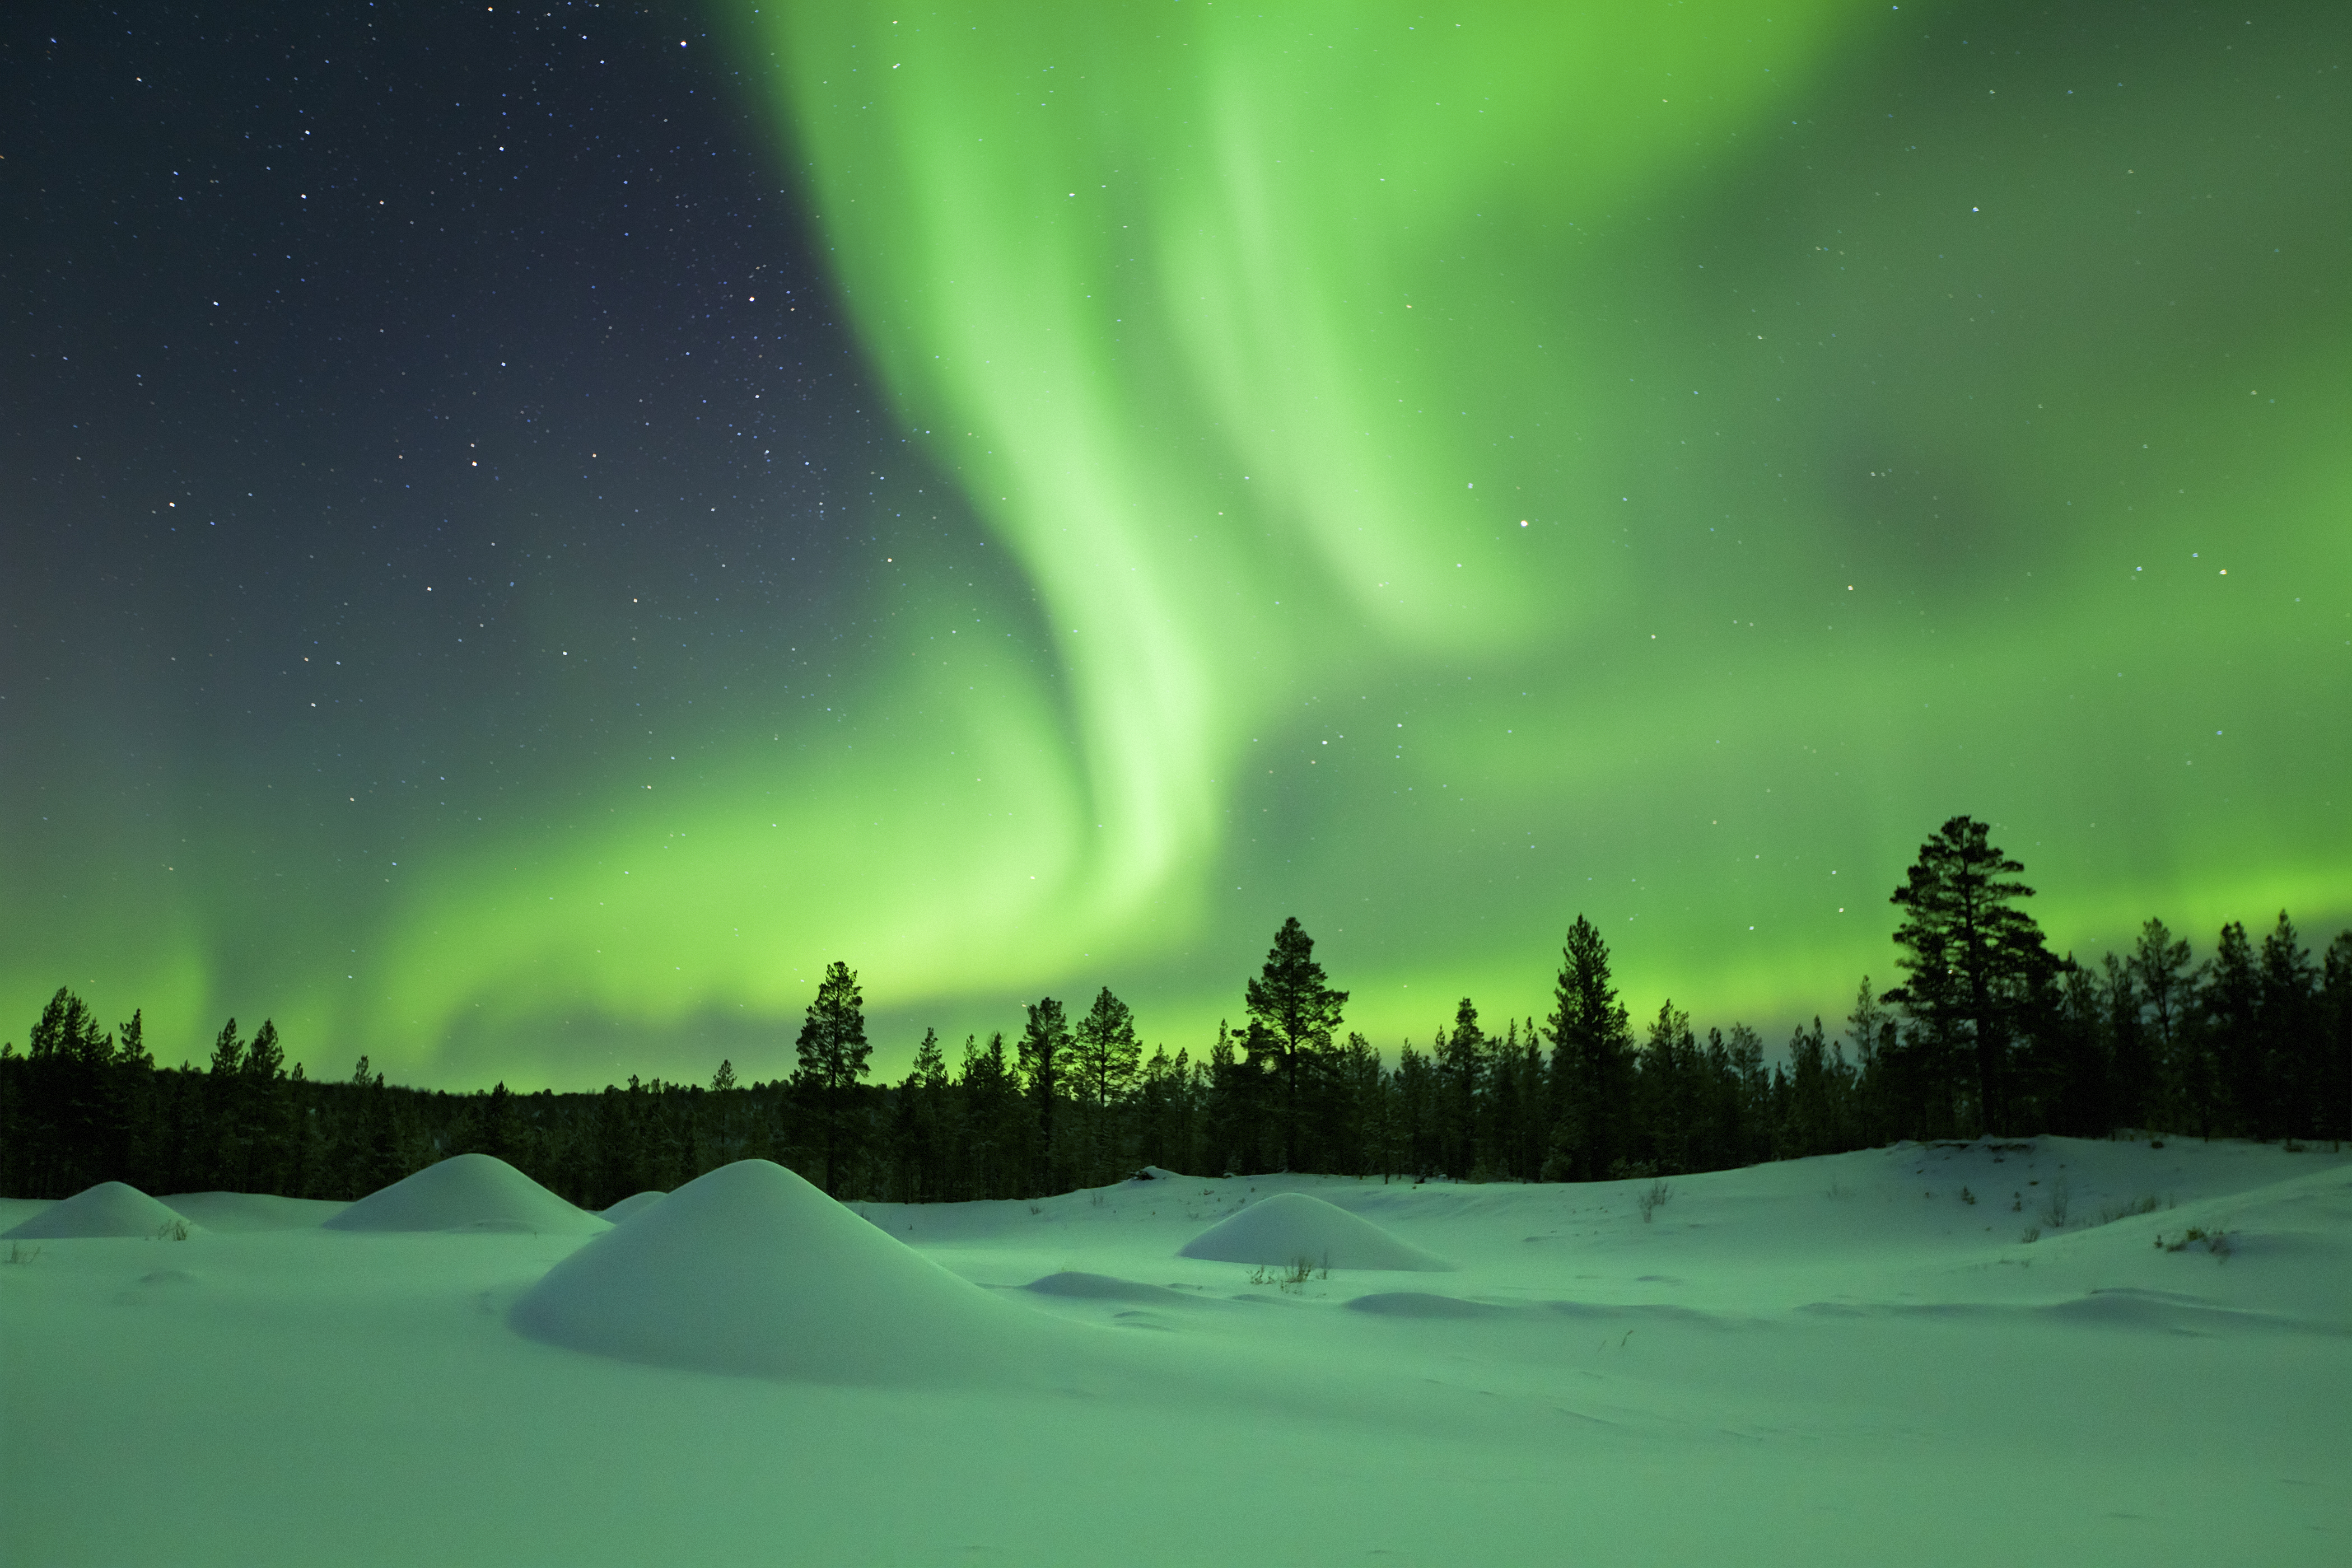 4 Spectacular Nights in Lapland - Nothern Lights in Lapland